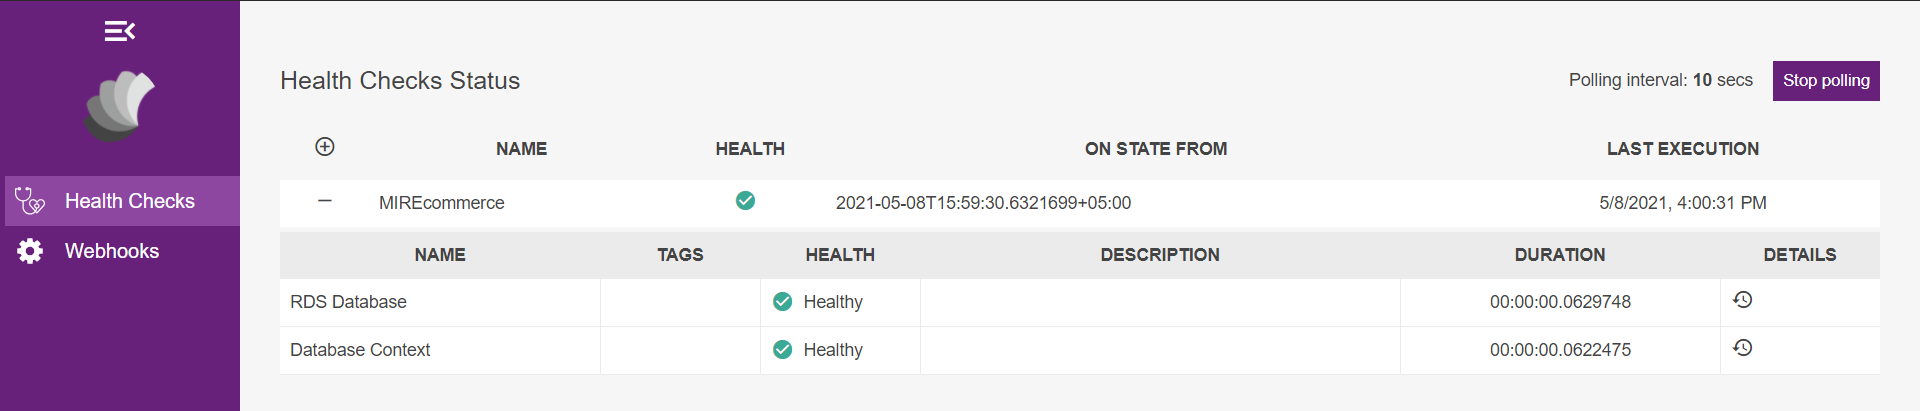 Implement Health Check Middleware on Asp.NET Core 3.1 Web App